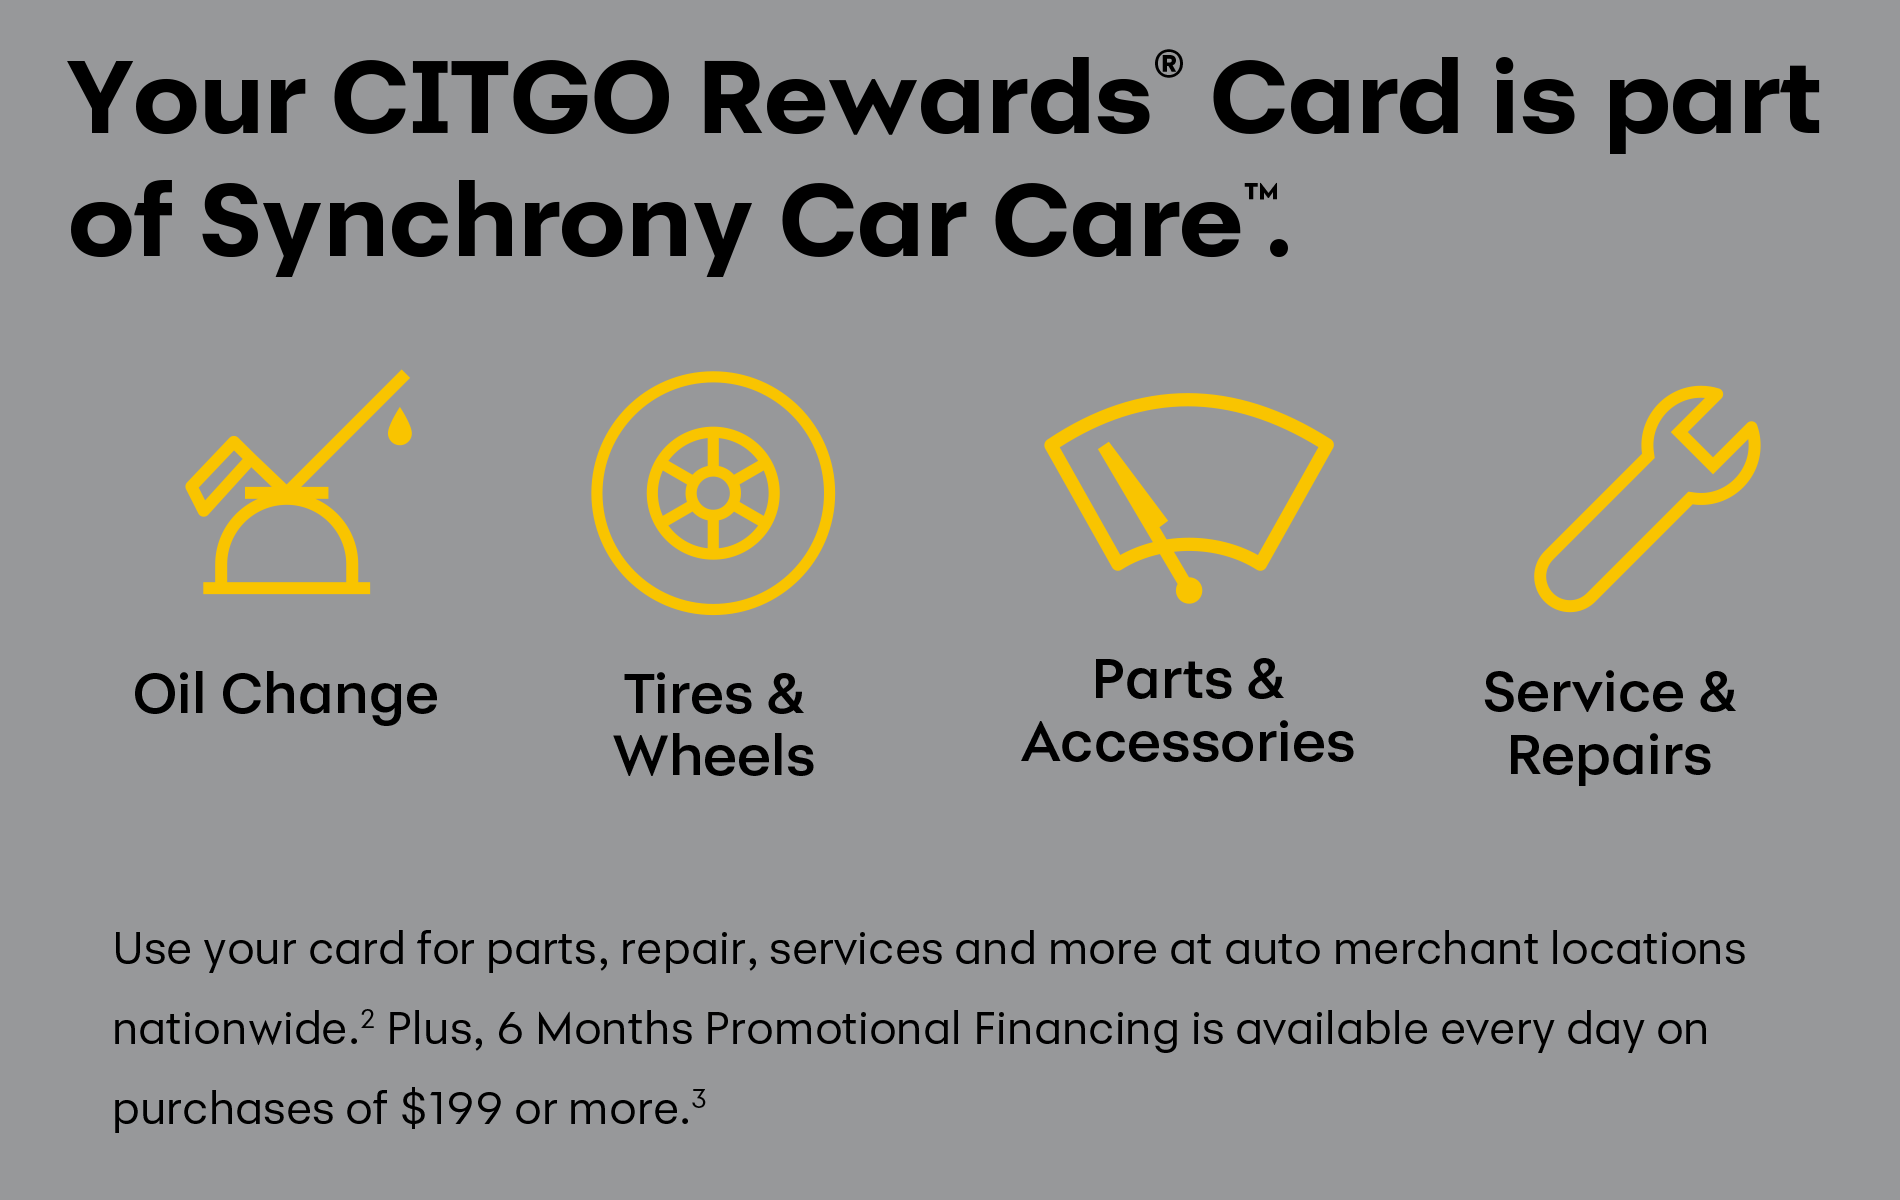  Your CITGO Rewards® Card is part of Synchrony Car Care™. Oil Change - Tires & Wheels - Parts & Accessories - Service & Repairs - Use your card for parts, repair, services and more at auto merchant locations nationwide.(2) Plus, 6 Months Promotional Financing is available every day on purchases of $199 or more.(3)